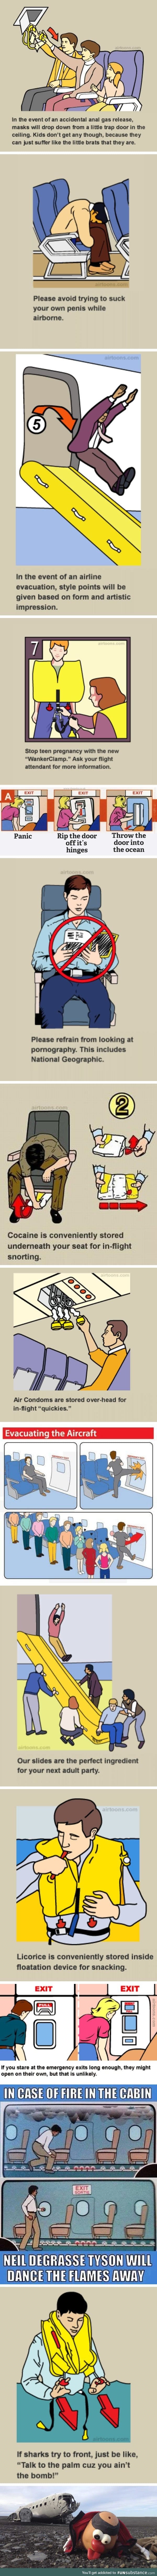 13 Hilarious Airline Safety Cards That You Shouldn't Follow